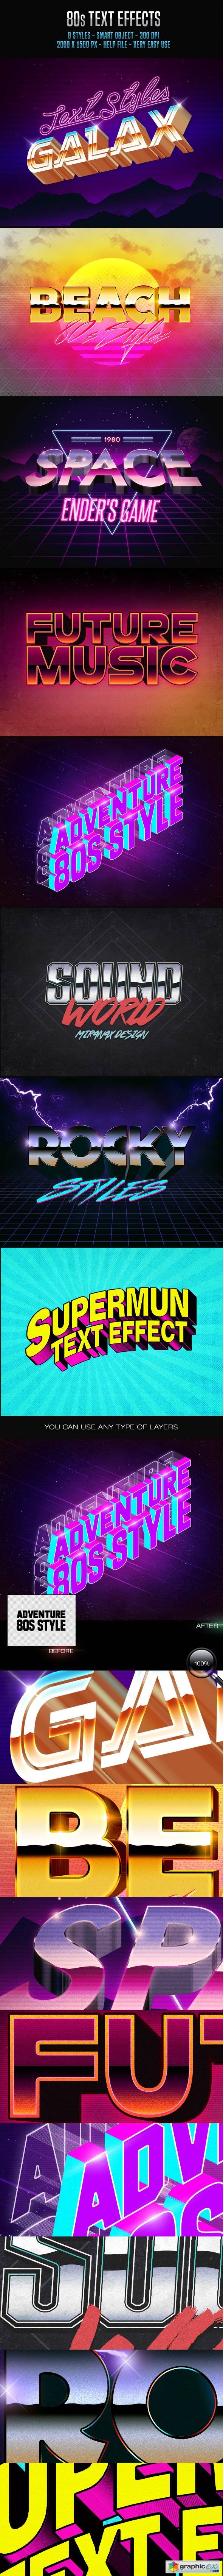 80s Text Effects 15163955